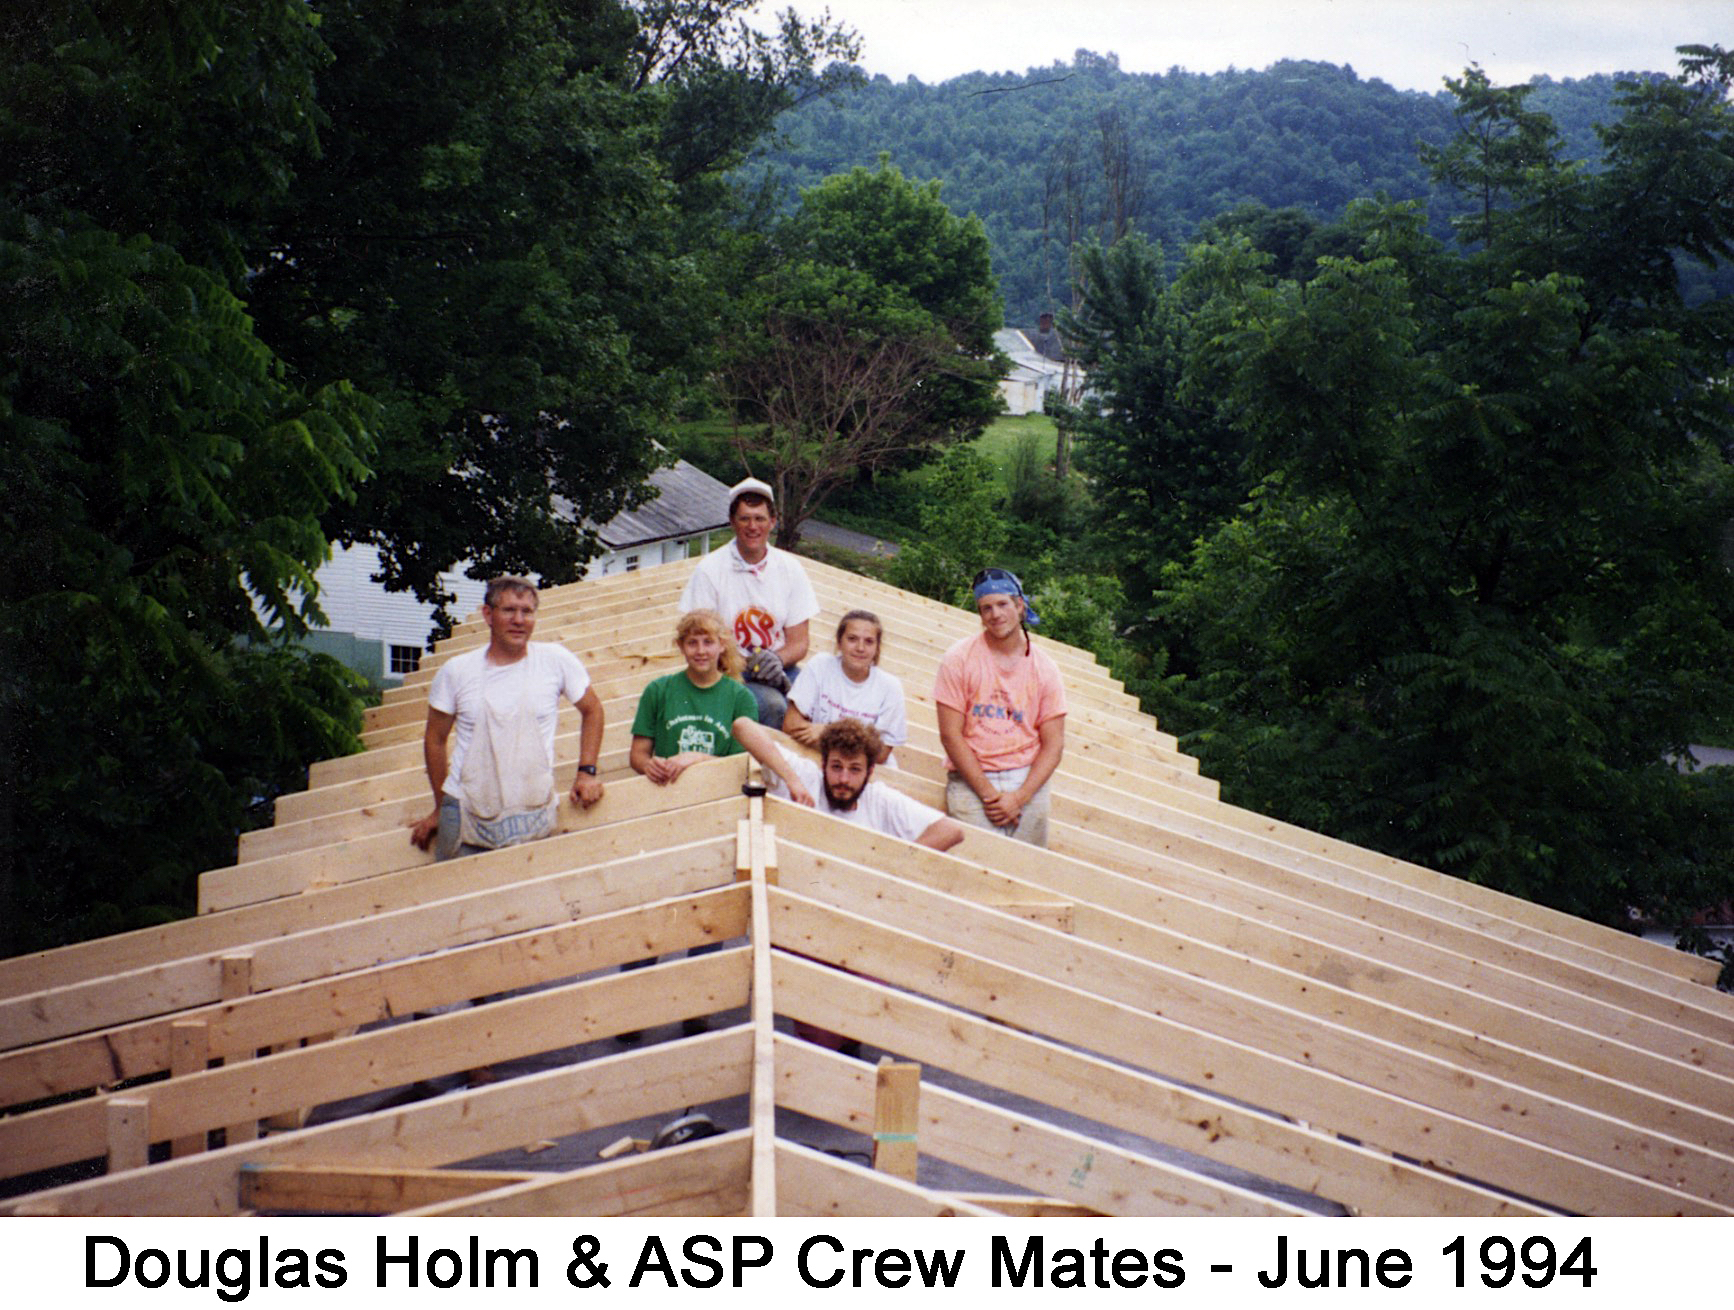 The six member crew is on top the mobile home among the rafters           they have assembled for the roof.